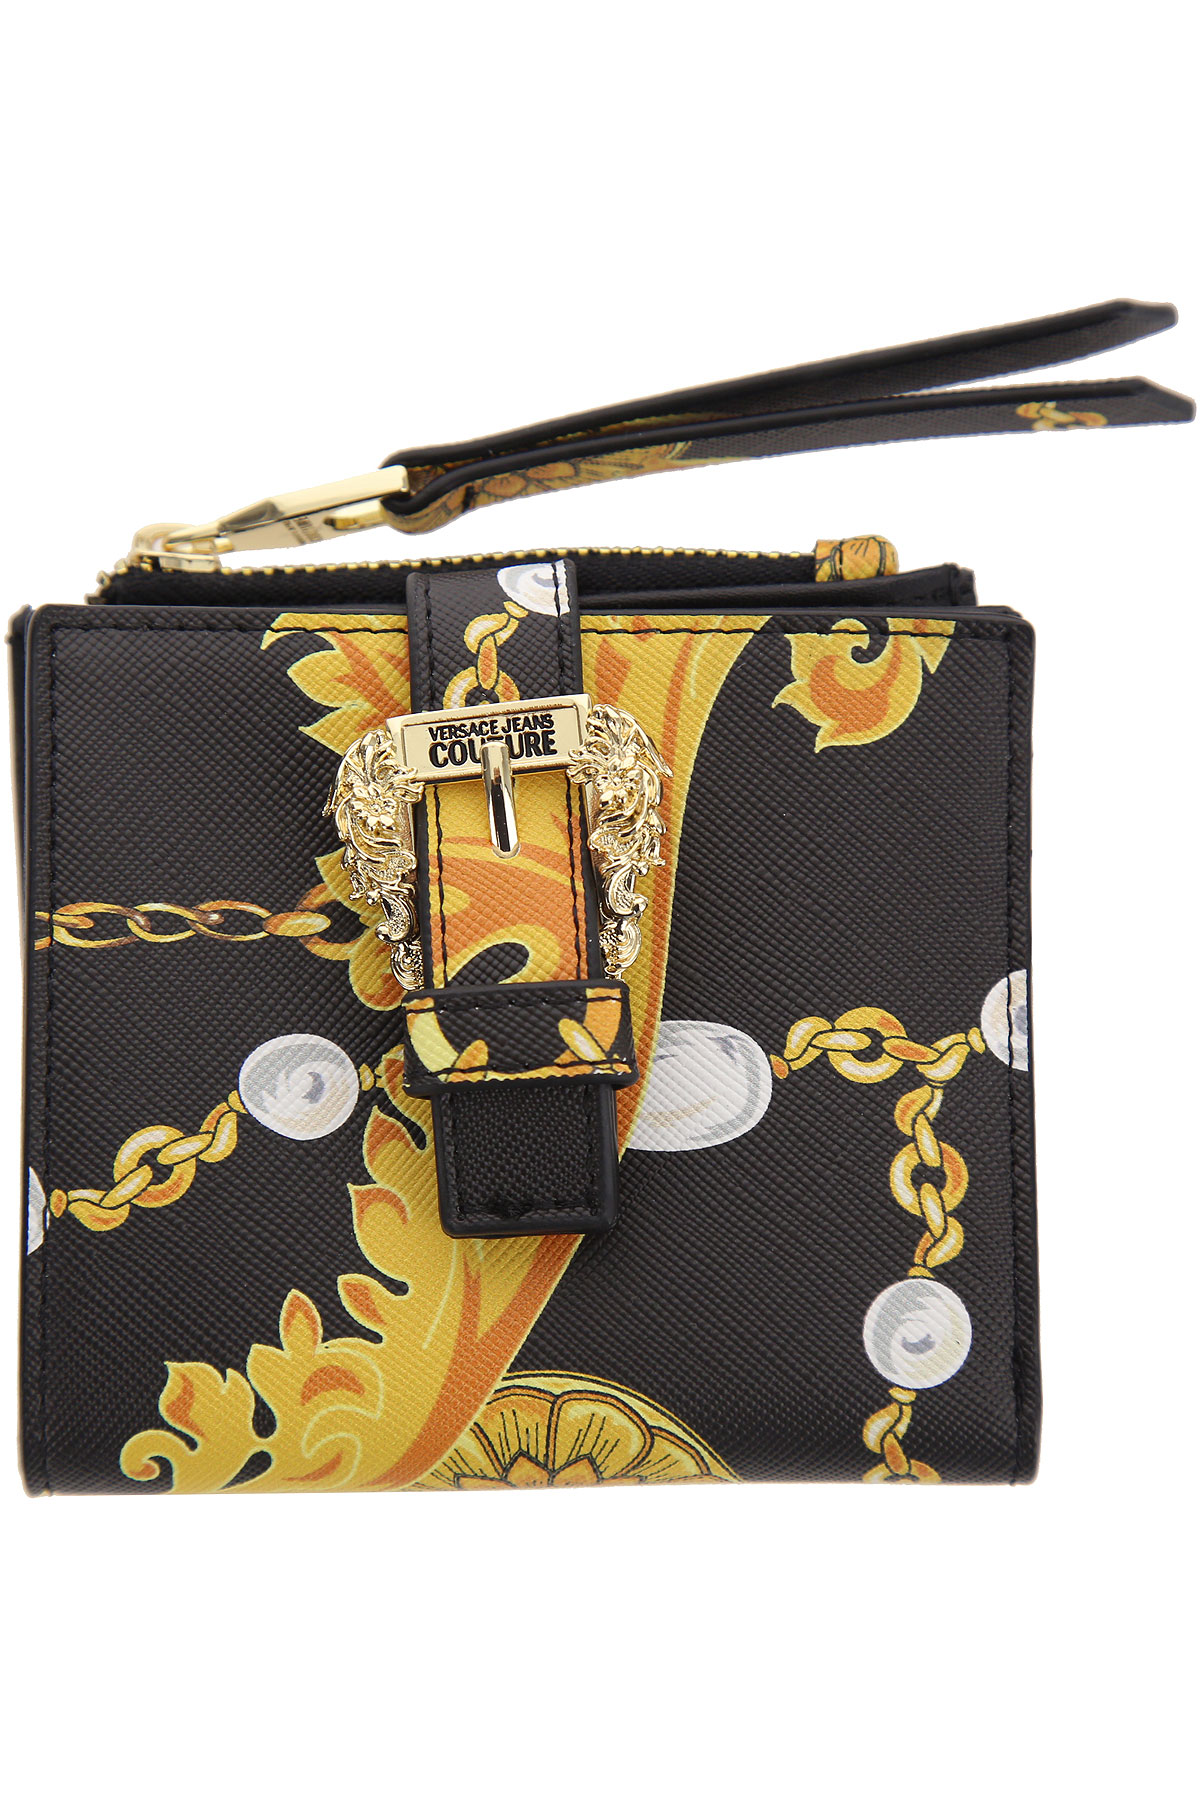 Versace Jeans Couture Saffiano Lock Crossbody Bag With OG Gift Box & Dust  Bag Wine 525 at Rs 5499 | New Items in New Delhi | ID: 2852819806691